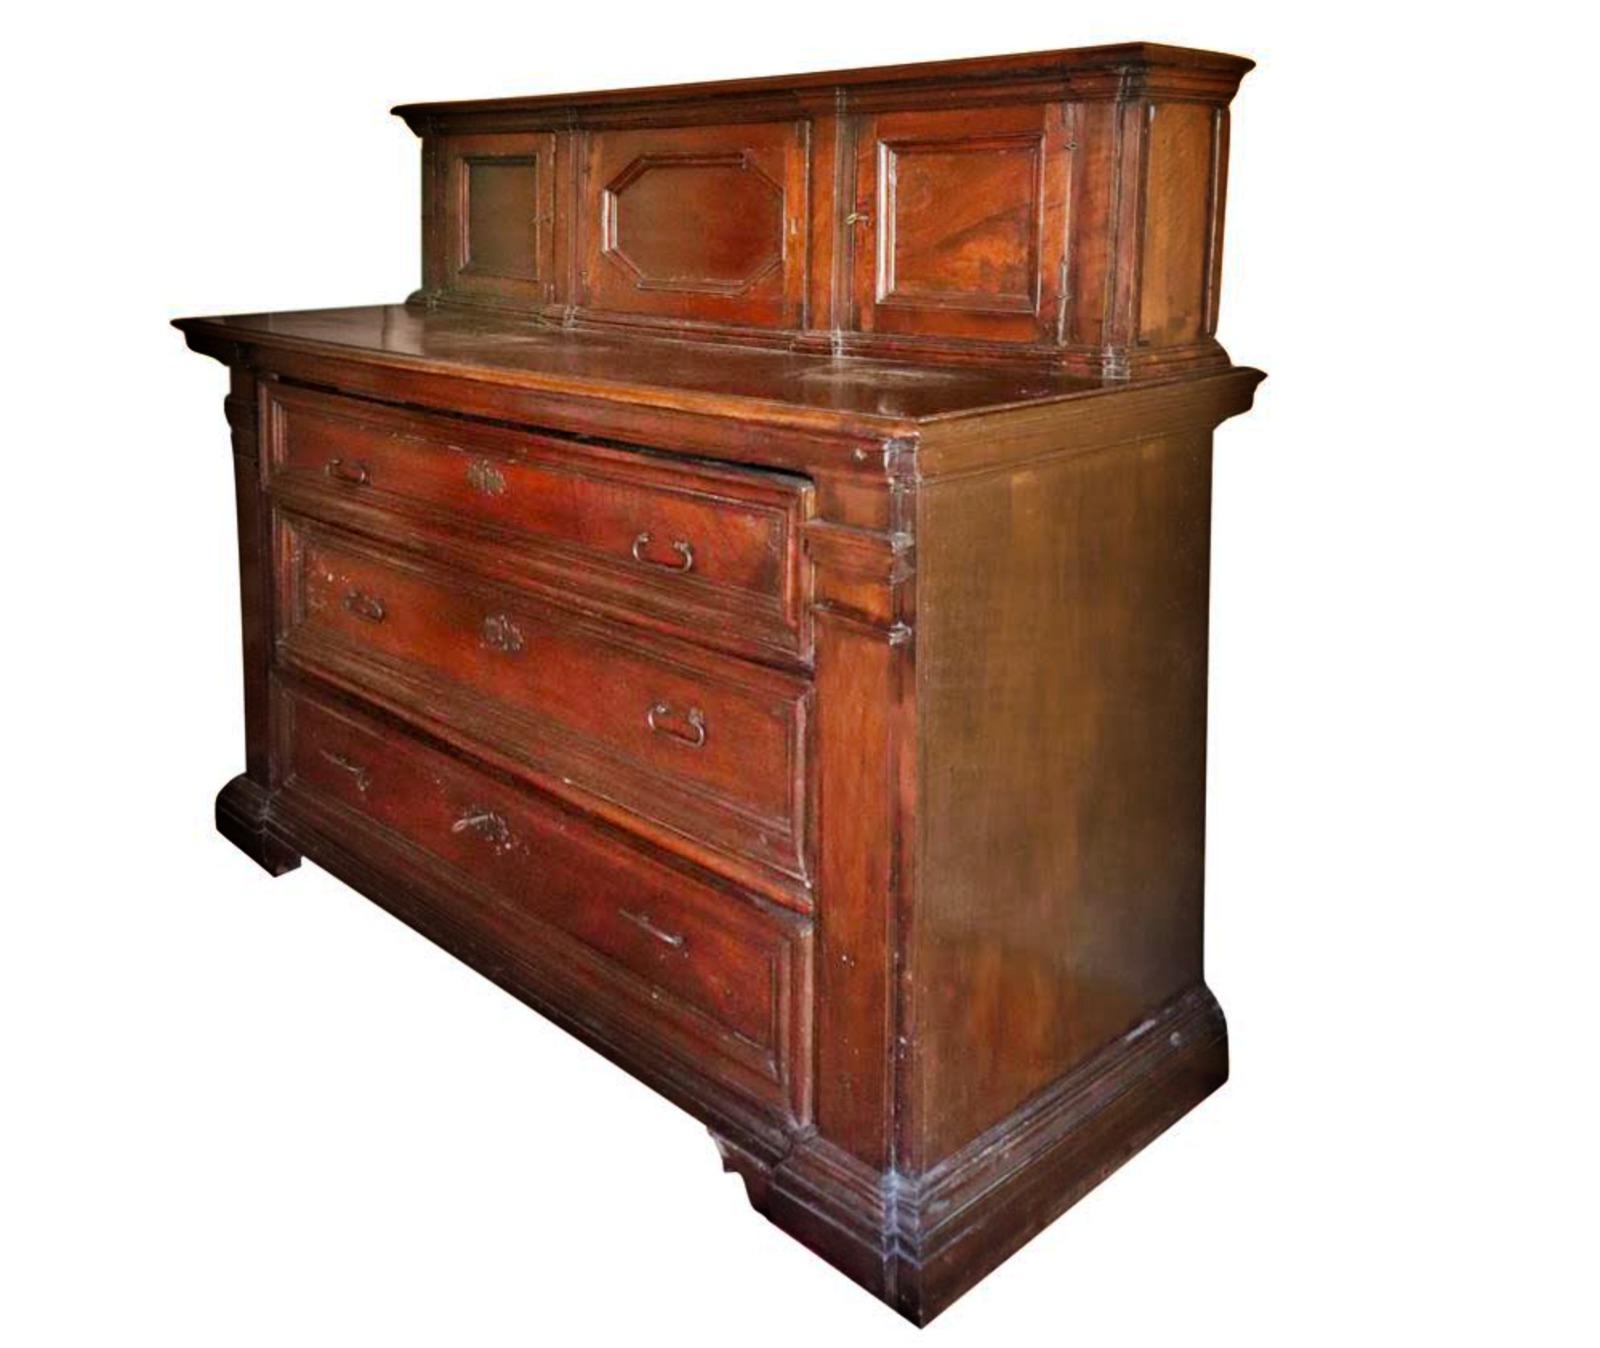 Important Italian Sacristy Furniture in walnut
17th Century Century 
Dimensions:
h 155 cm, h base 110 x L 180 cm x P 70 cm 
With three drawers, with lift bearing three doors, iron handle and bracket feet. 
good condition.